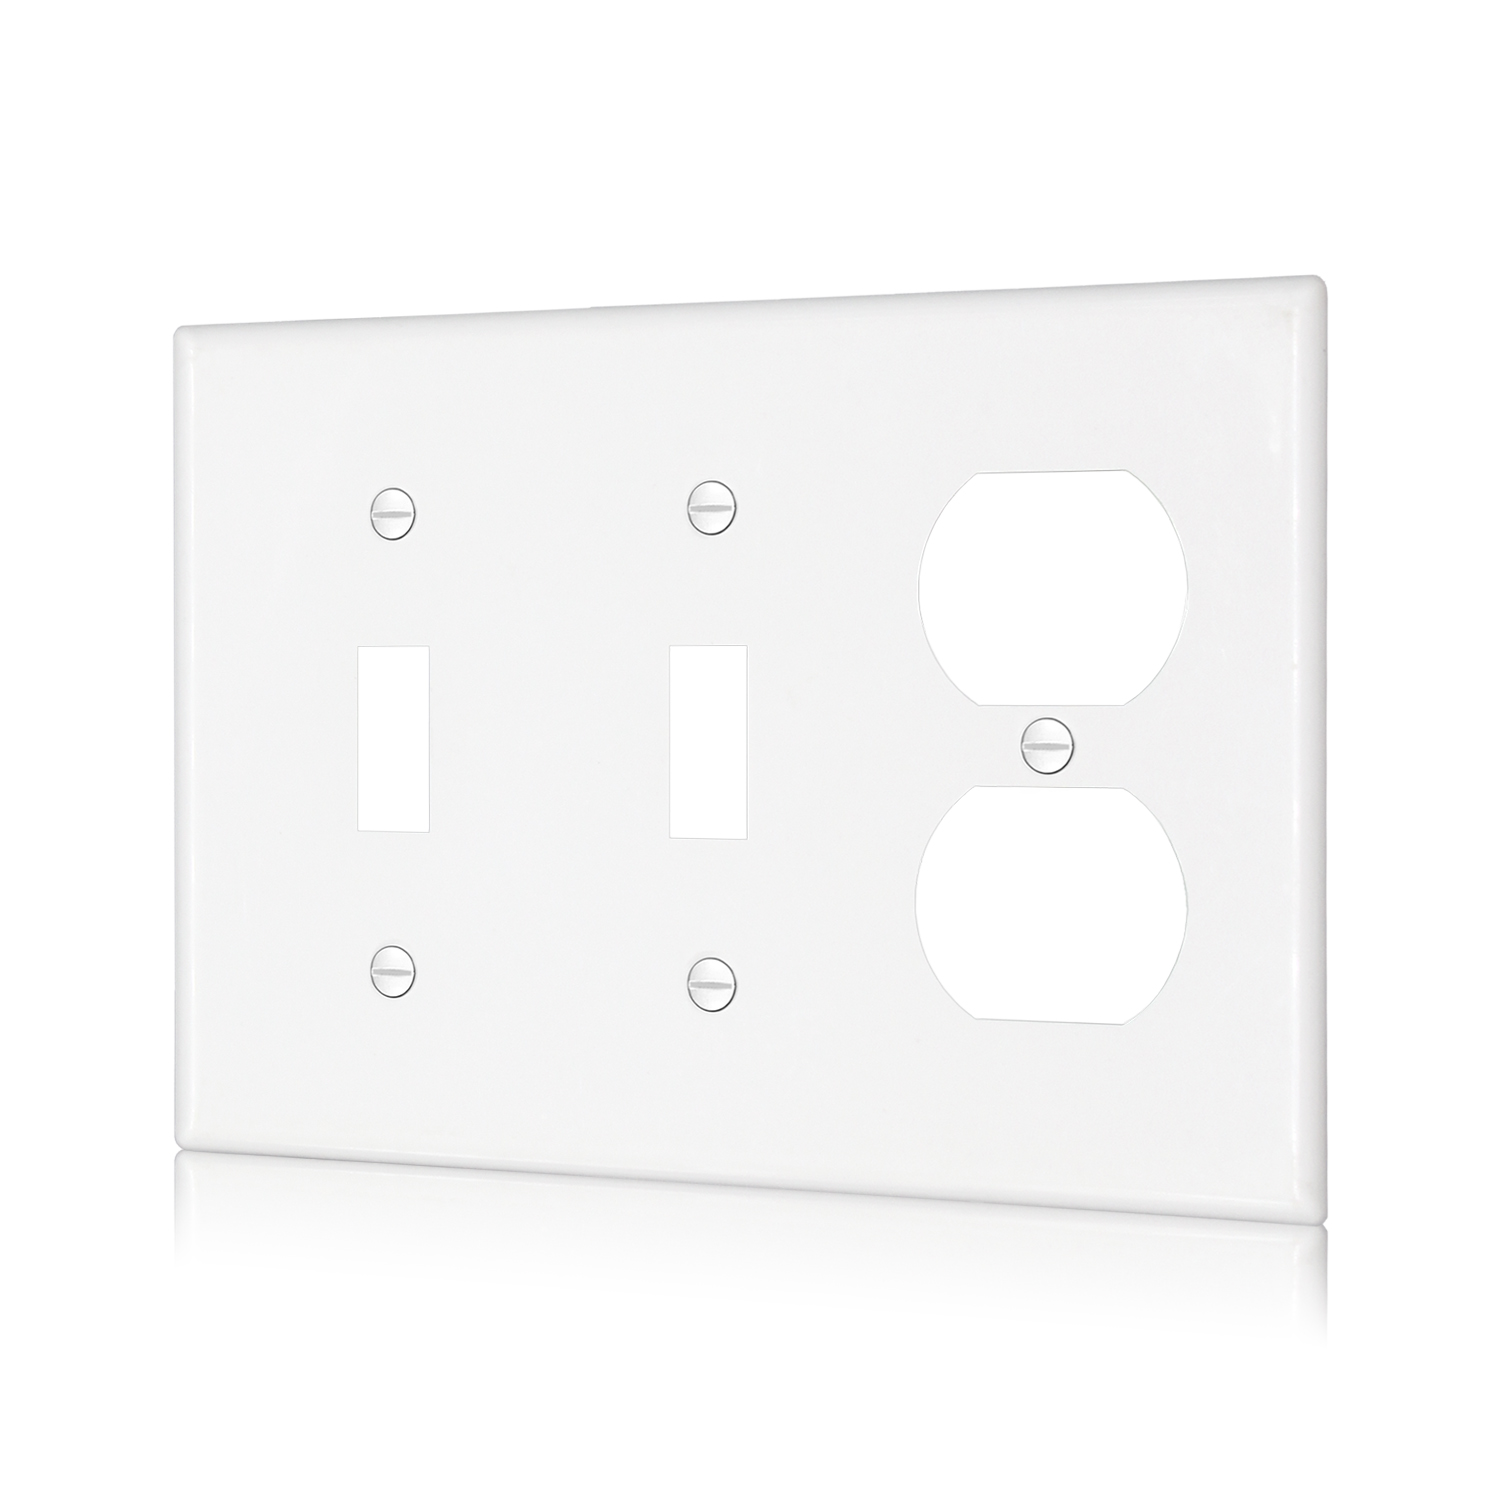 3 Gang Combo Wall Plate 2 Toggle/1 Duplex outlet opening, SSC-TTRE